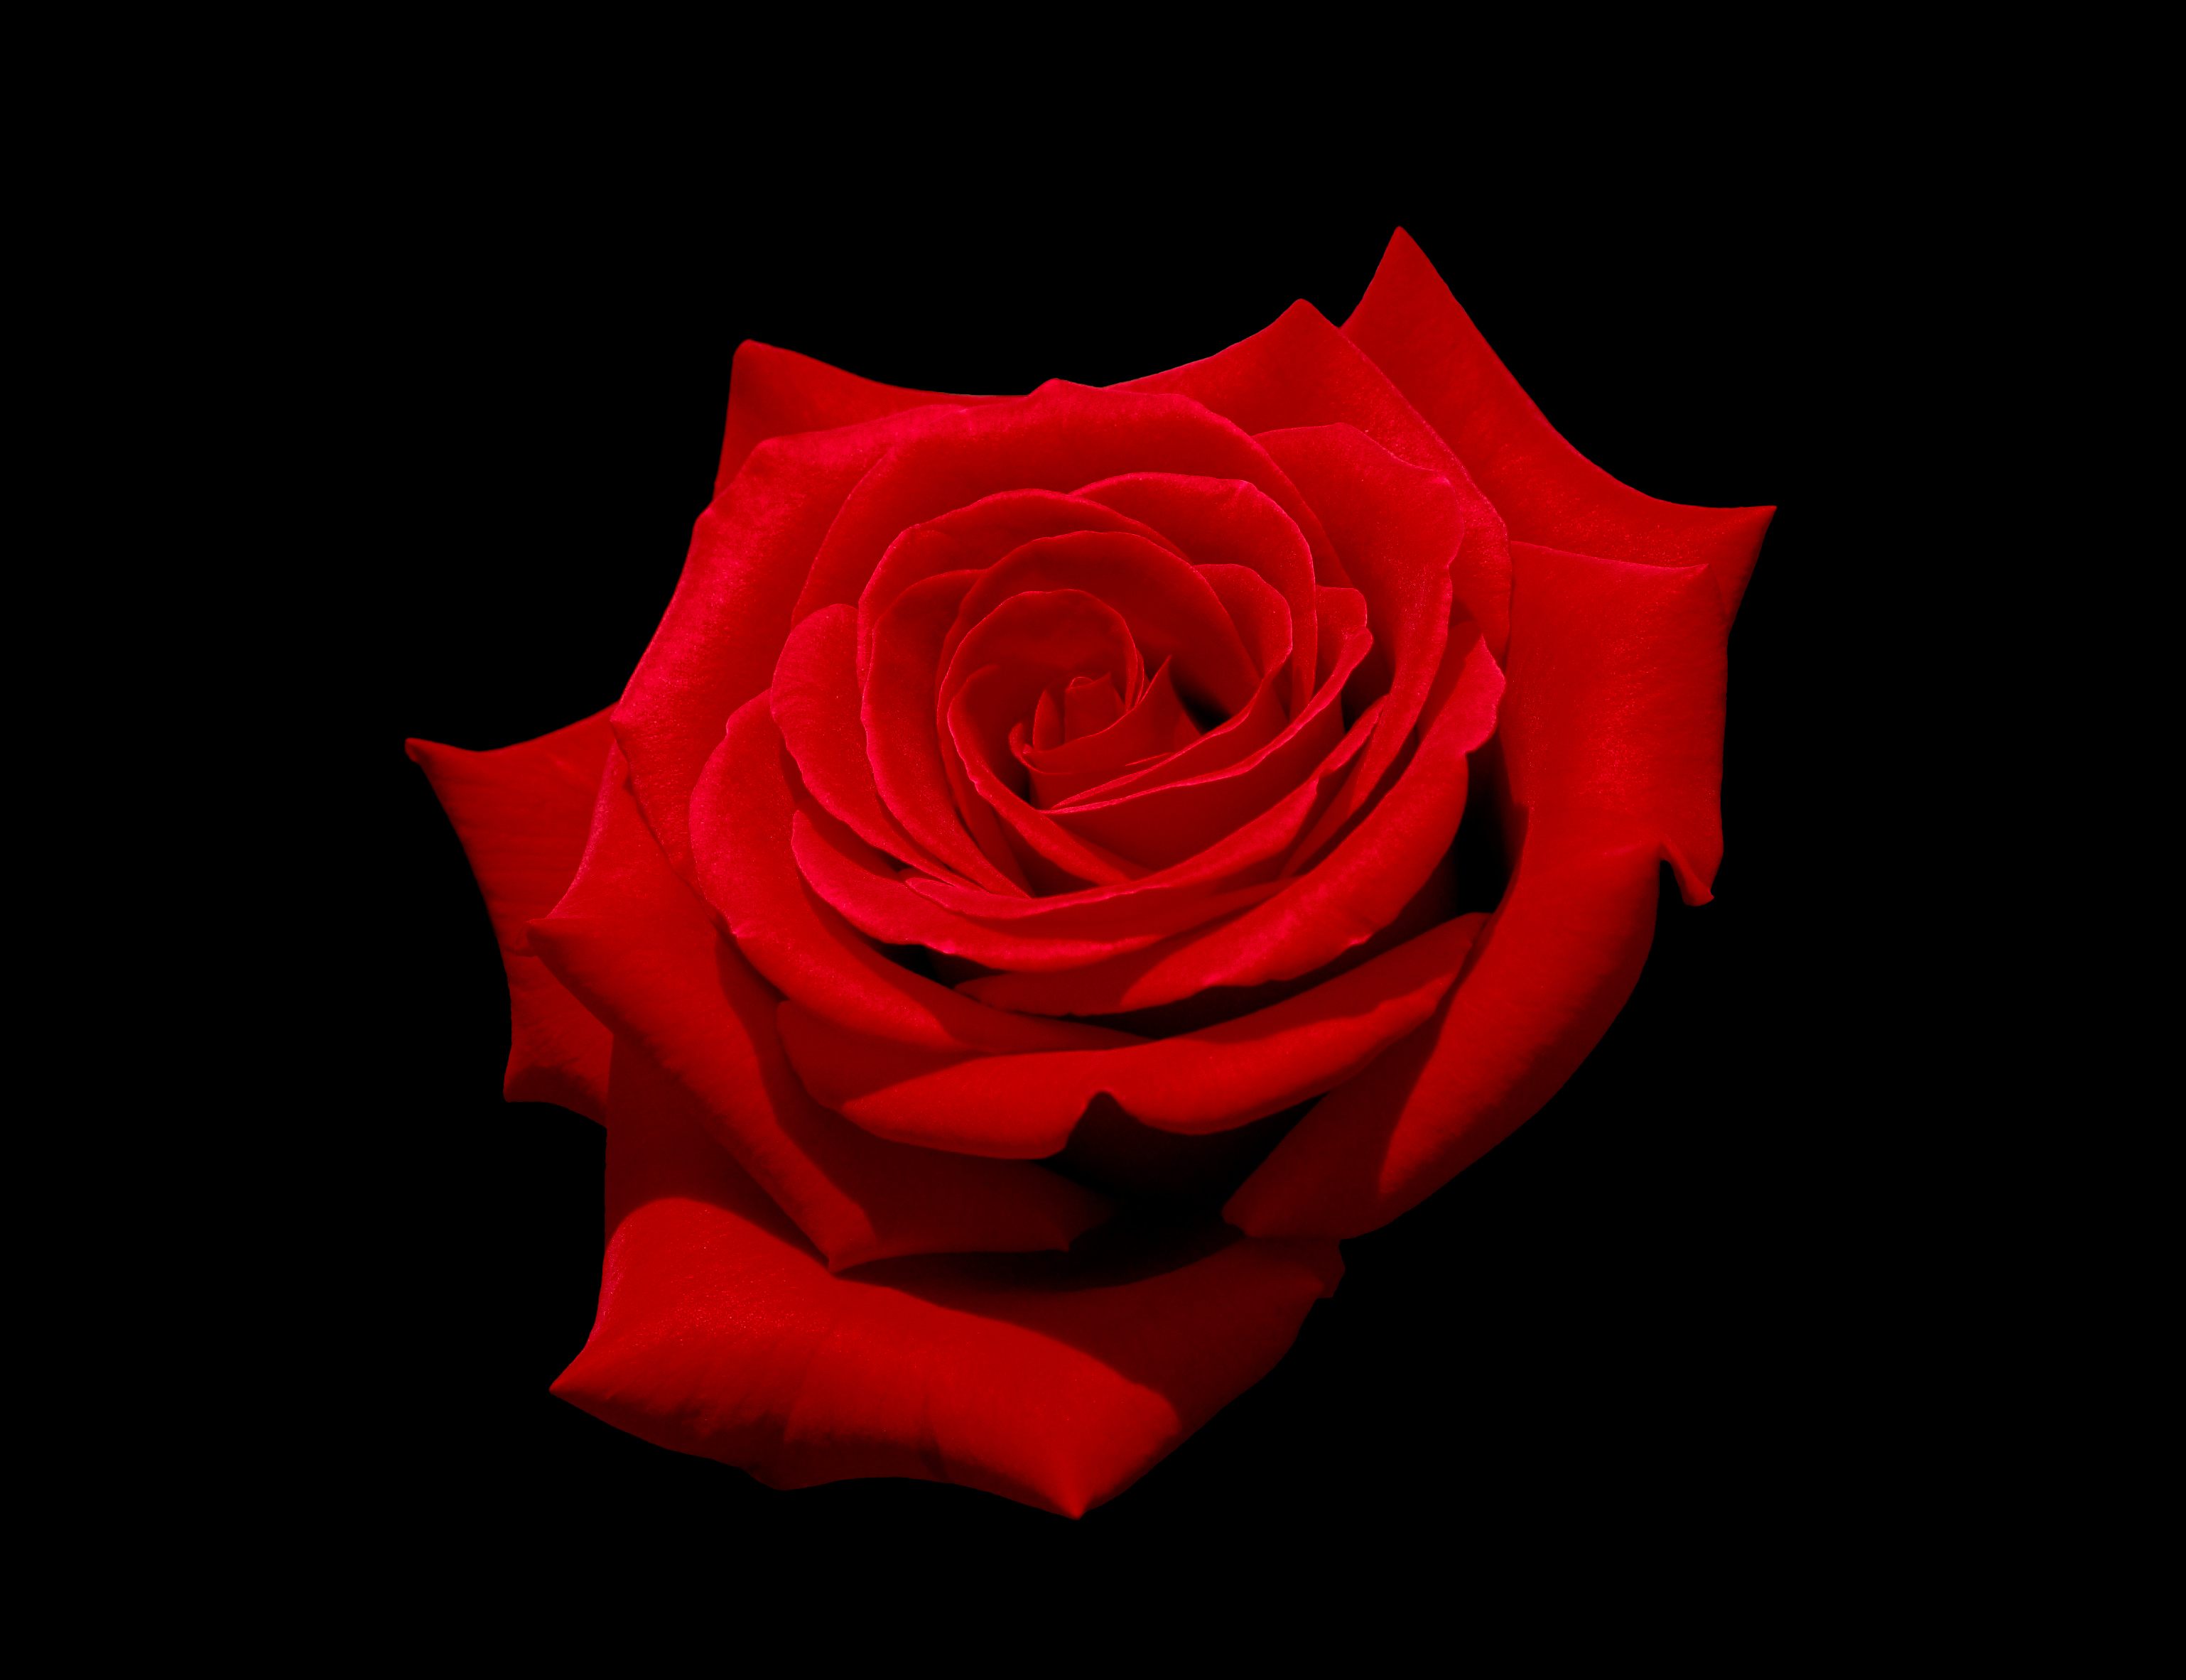 Free Download Filered Rose With Black Background Wikimedia Commons 3077x2365 For Your 